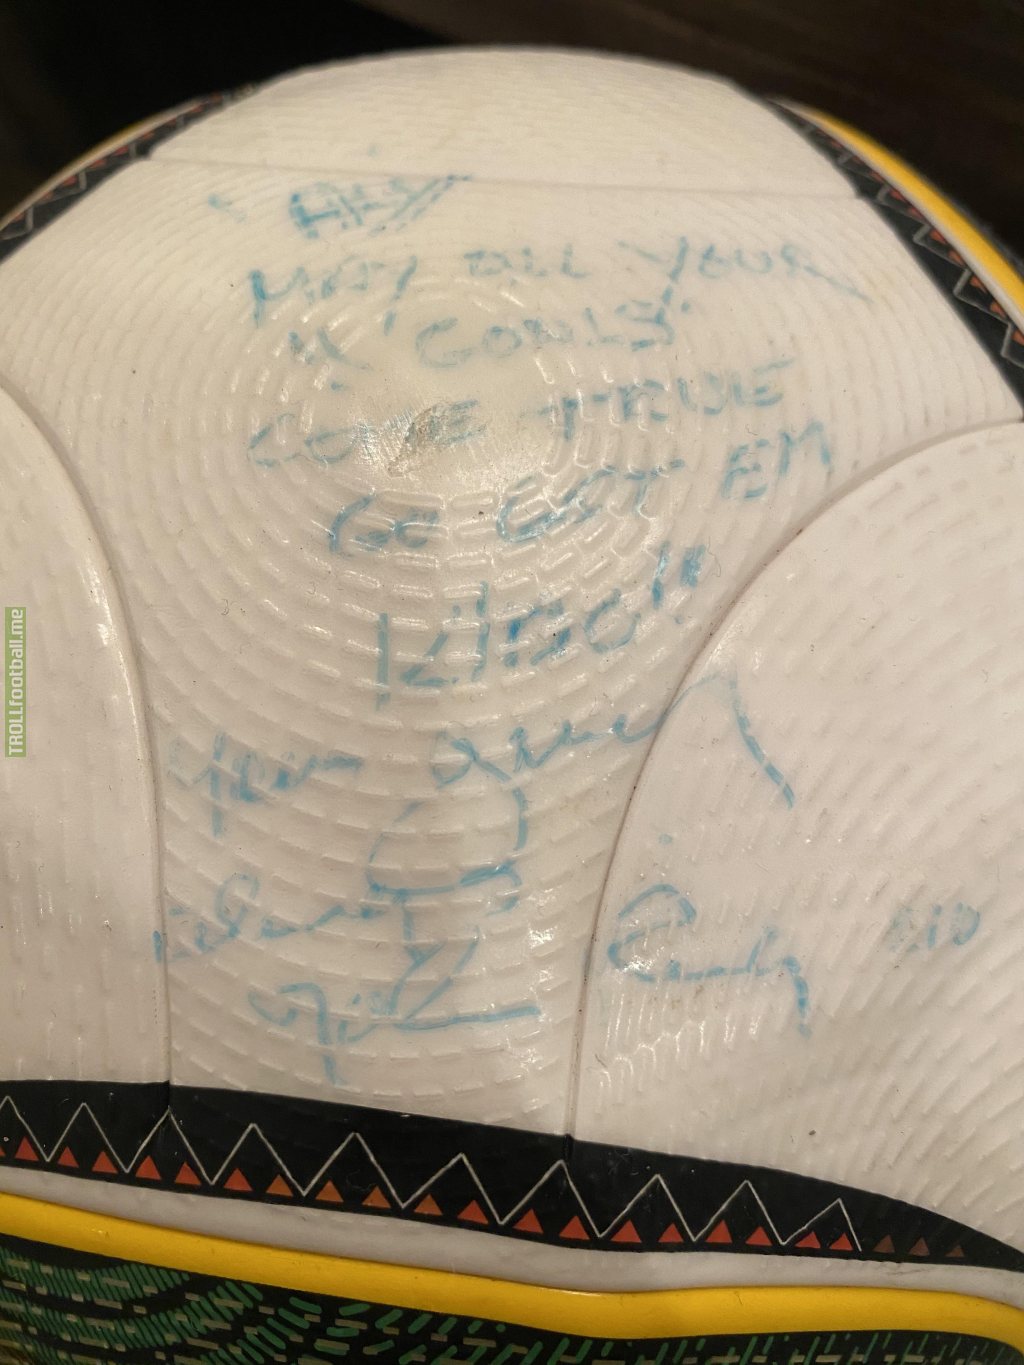 My friend has this ball that was signed by a USMNT player. Can BBC anyone decipher the signature? Around 2010